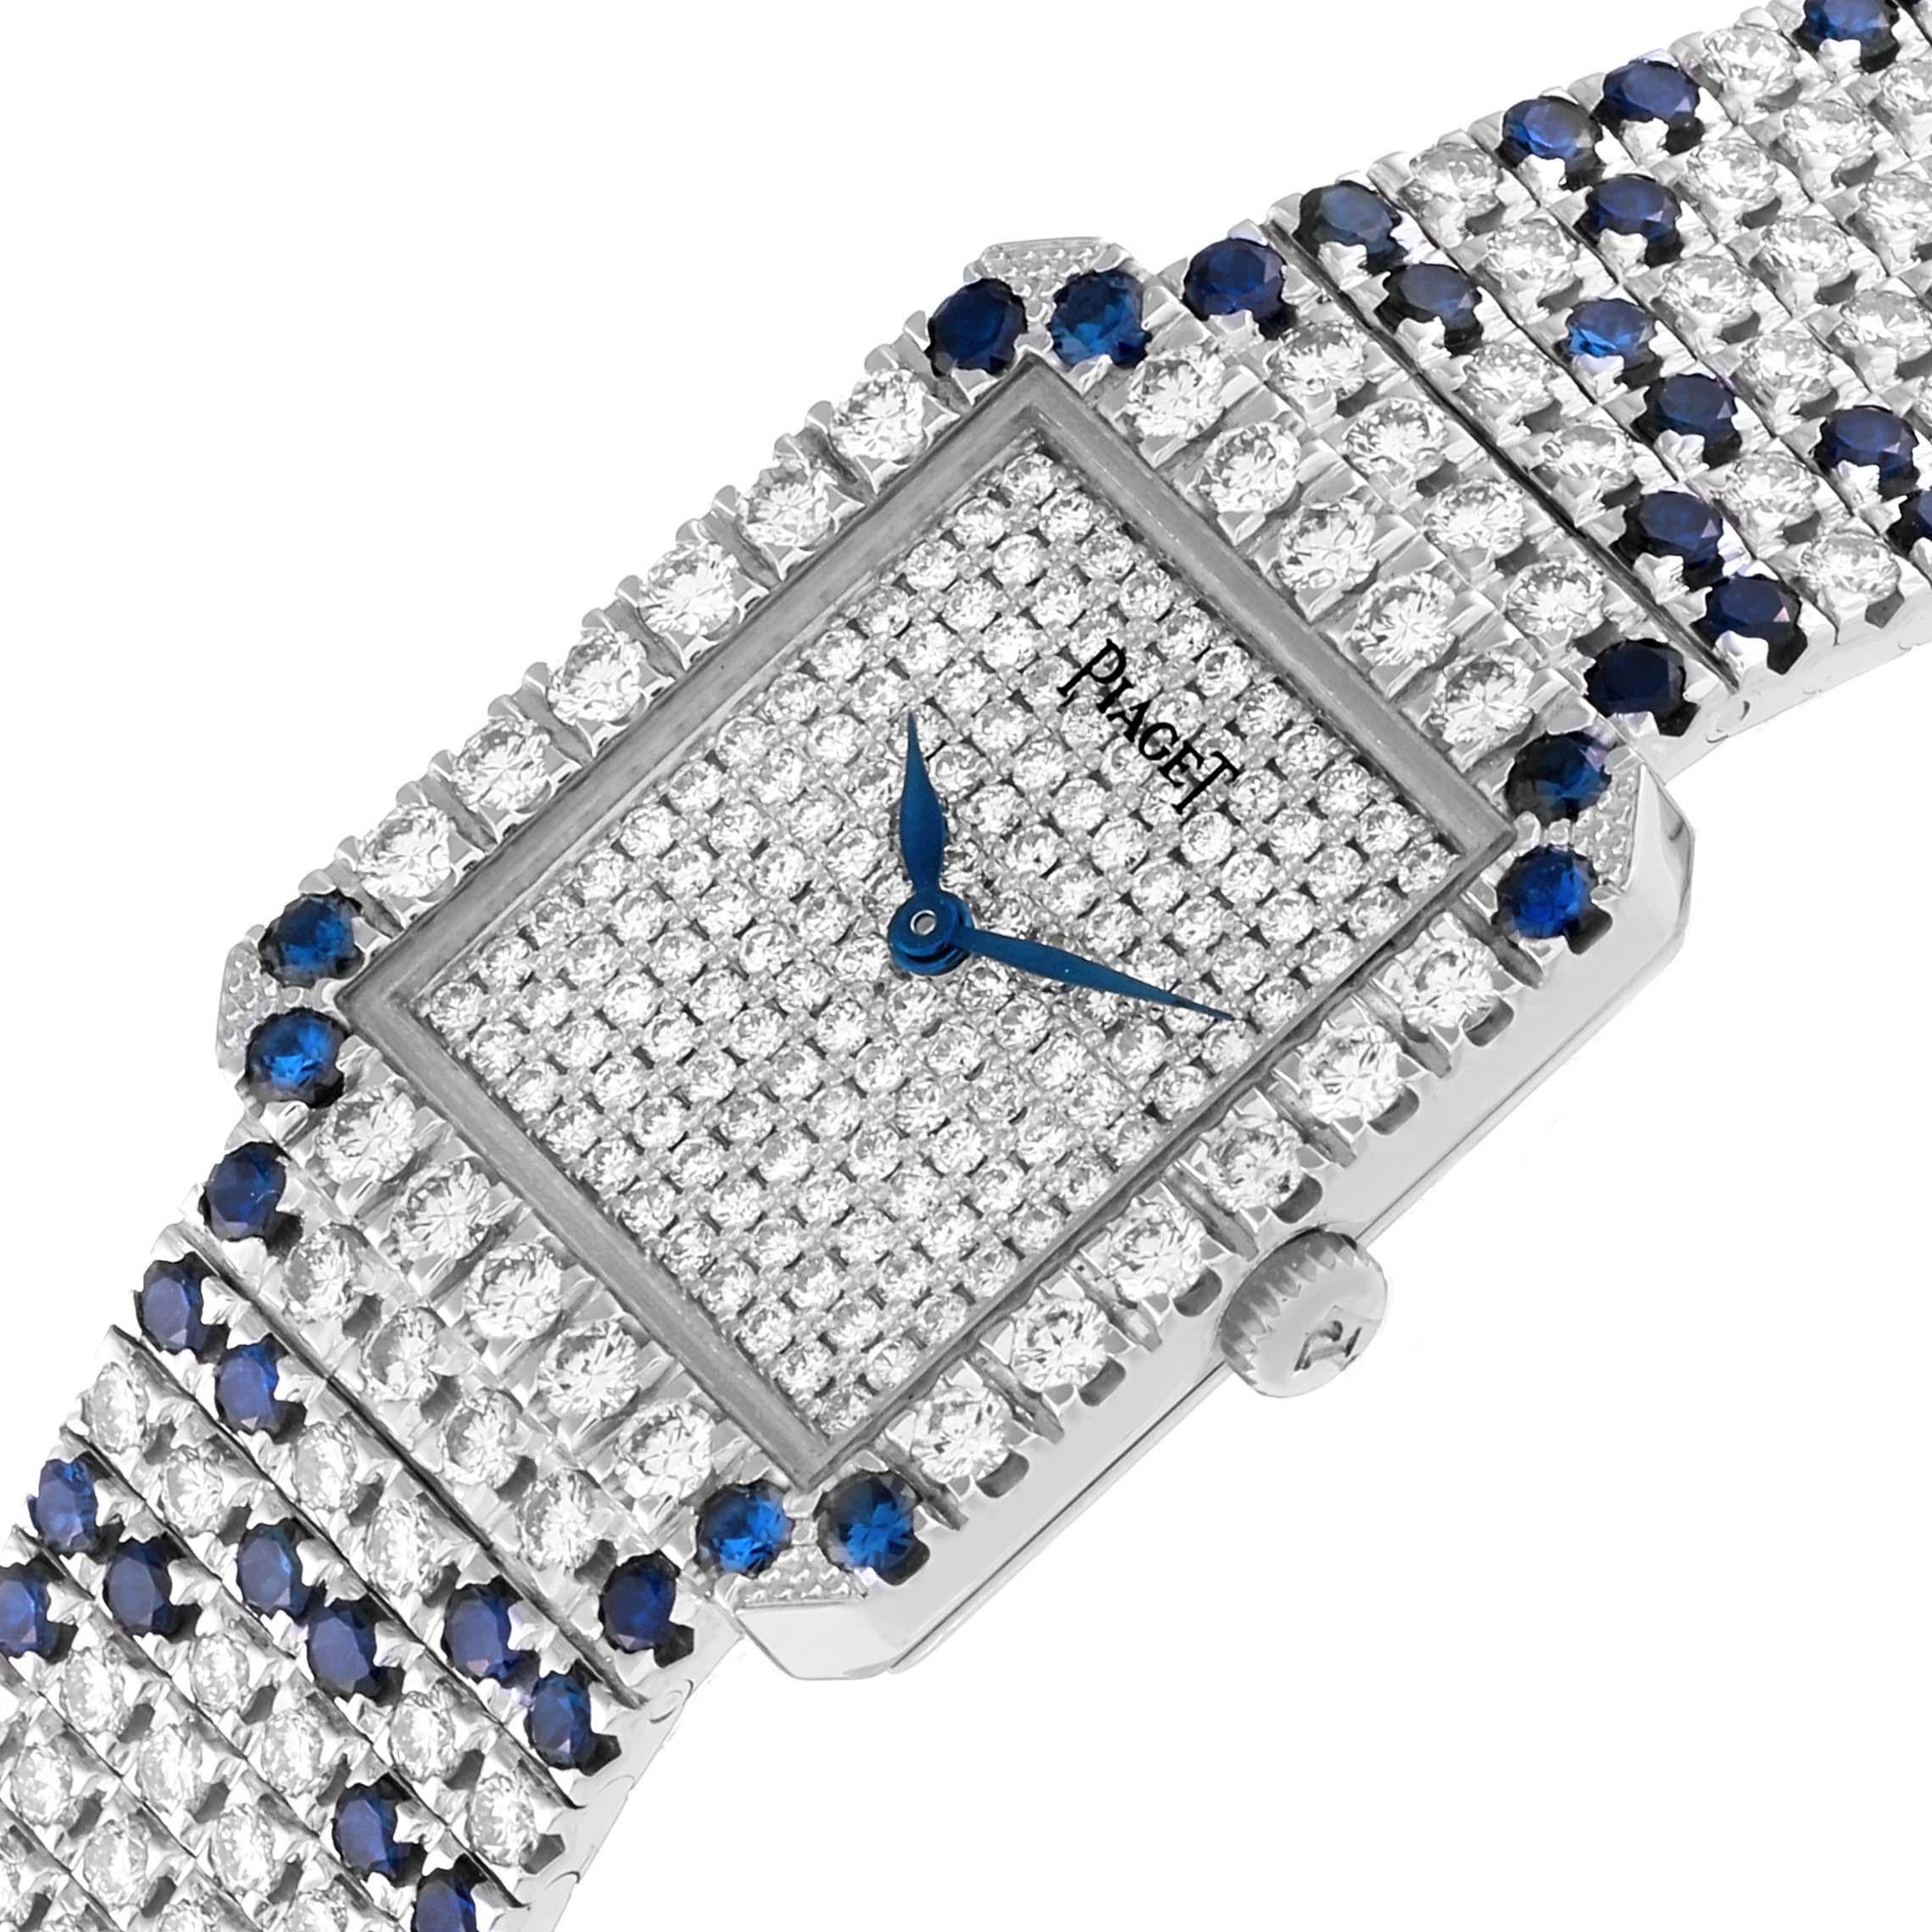 Piaget Protocole Exceptional White Gold Pave Diamond Sapphire Ladies Watch 83541 For Sale 1